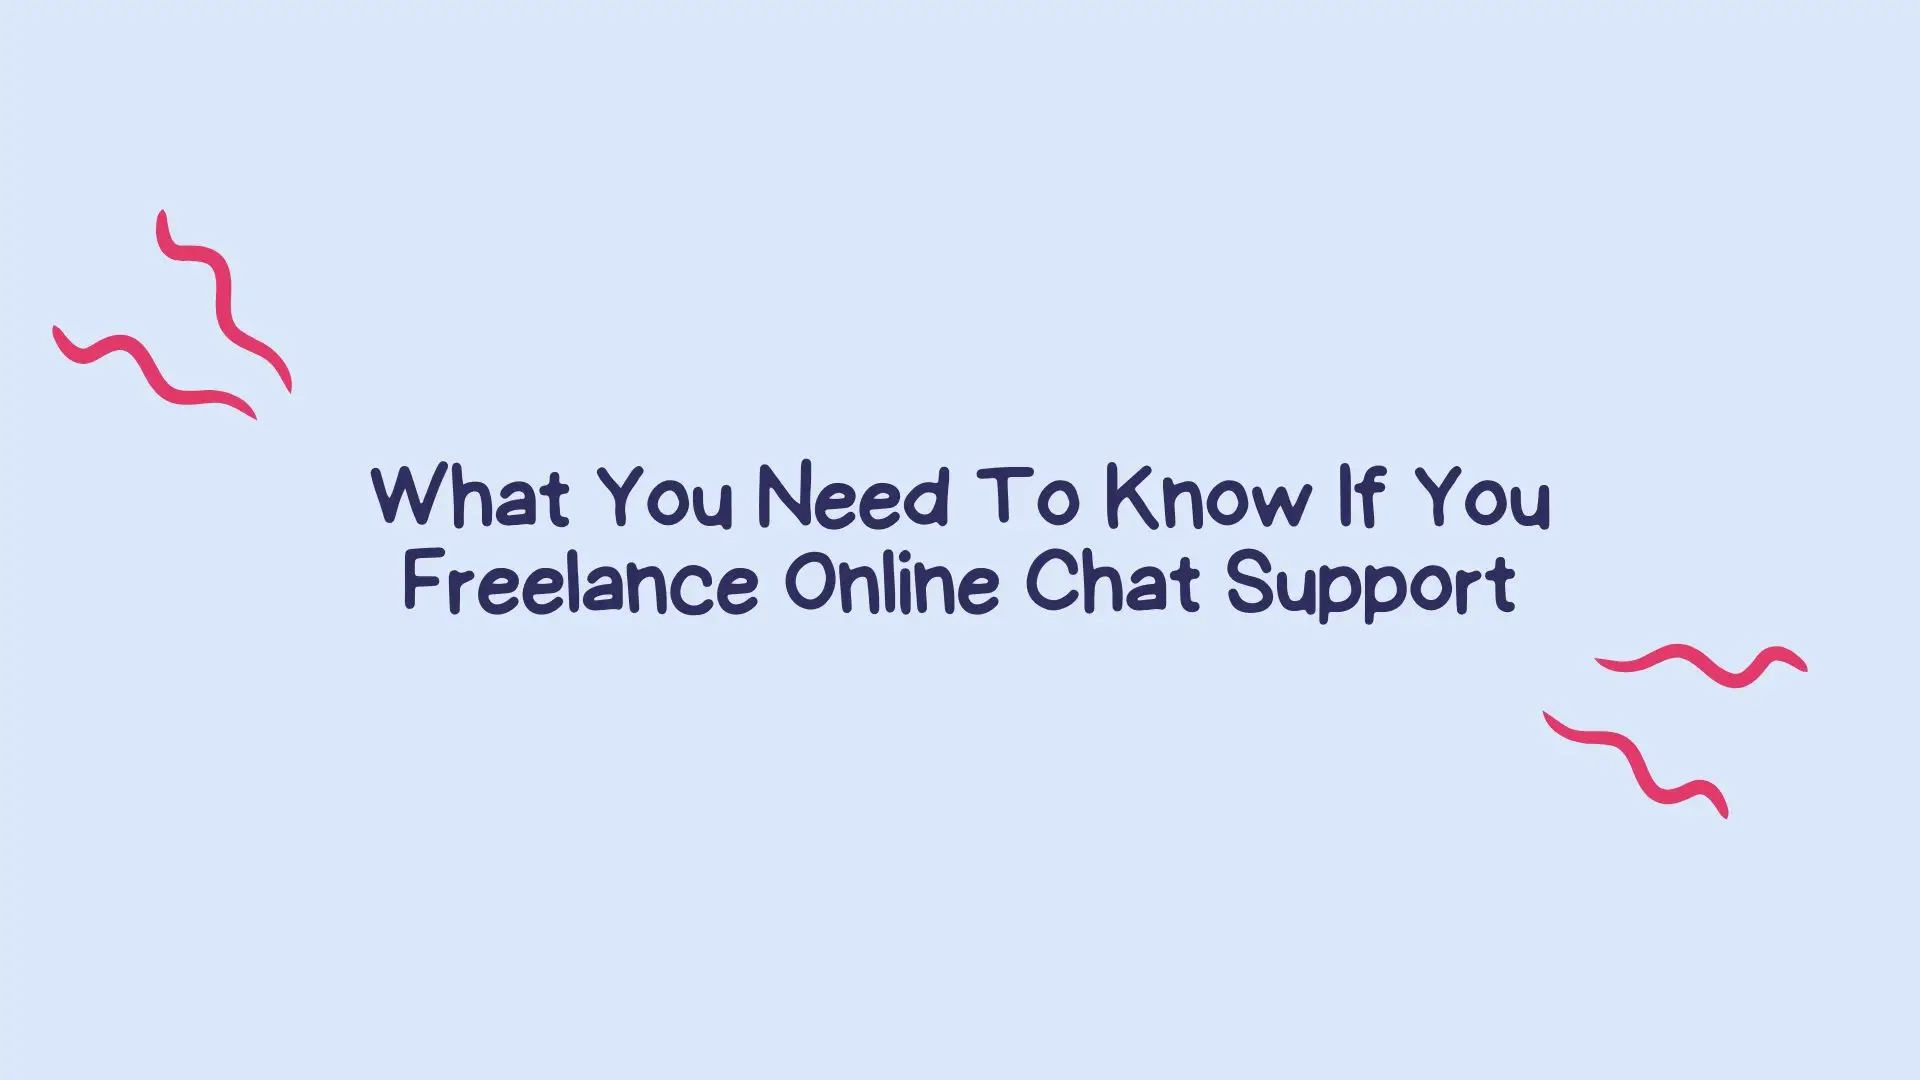 What You Need To Know If You Freelance Online Chat Support